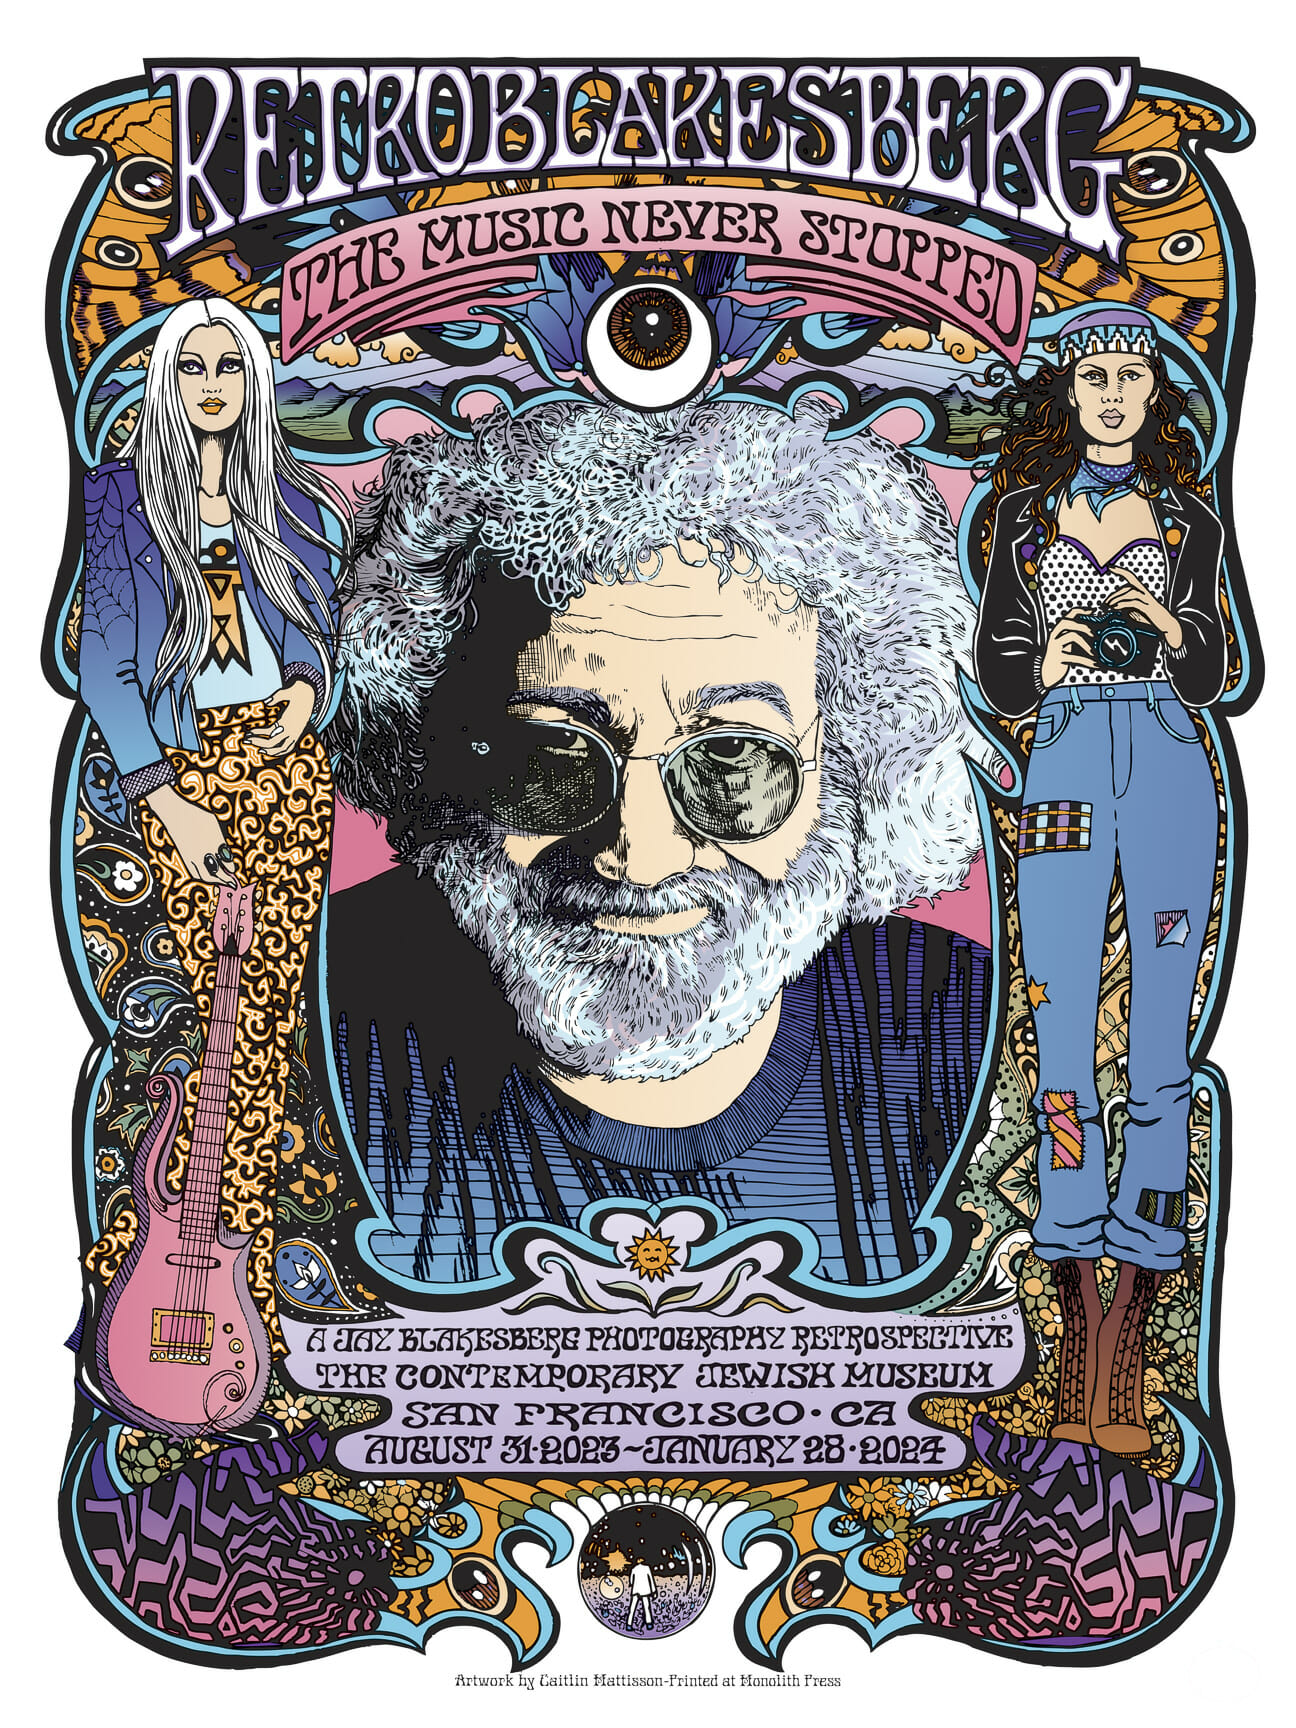 San Francisco to Welcome ‘RetroBlakesberg: The Music Never Stopped’ Exhibition by Renowned Photographer Jay Blakesberg